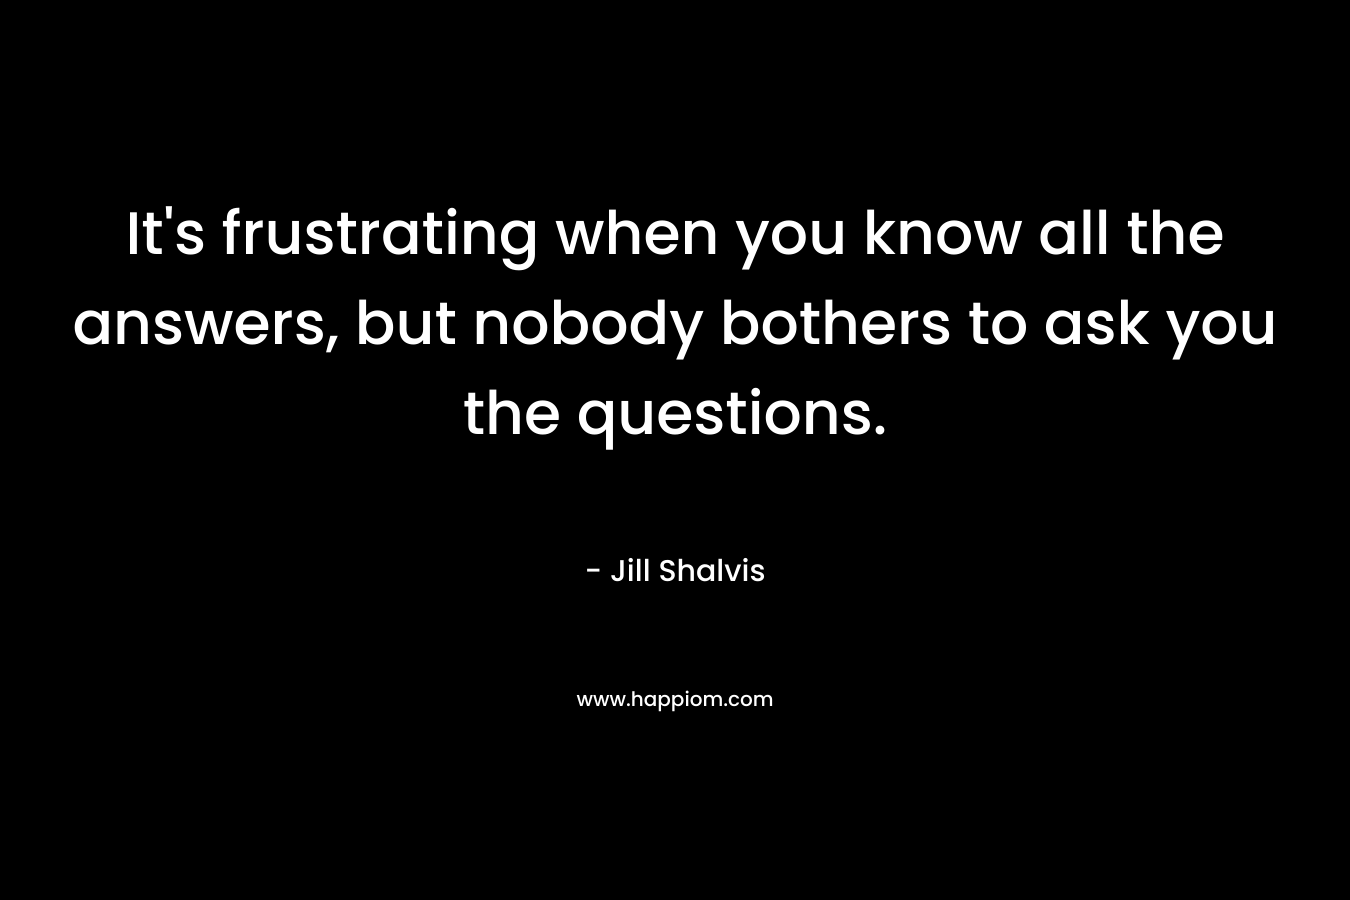 It’s frustrating when you know all the answers, but nobody bothers to ask you the questions. – Jill Shalvis